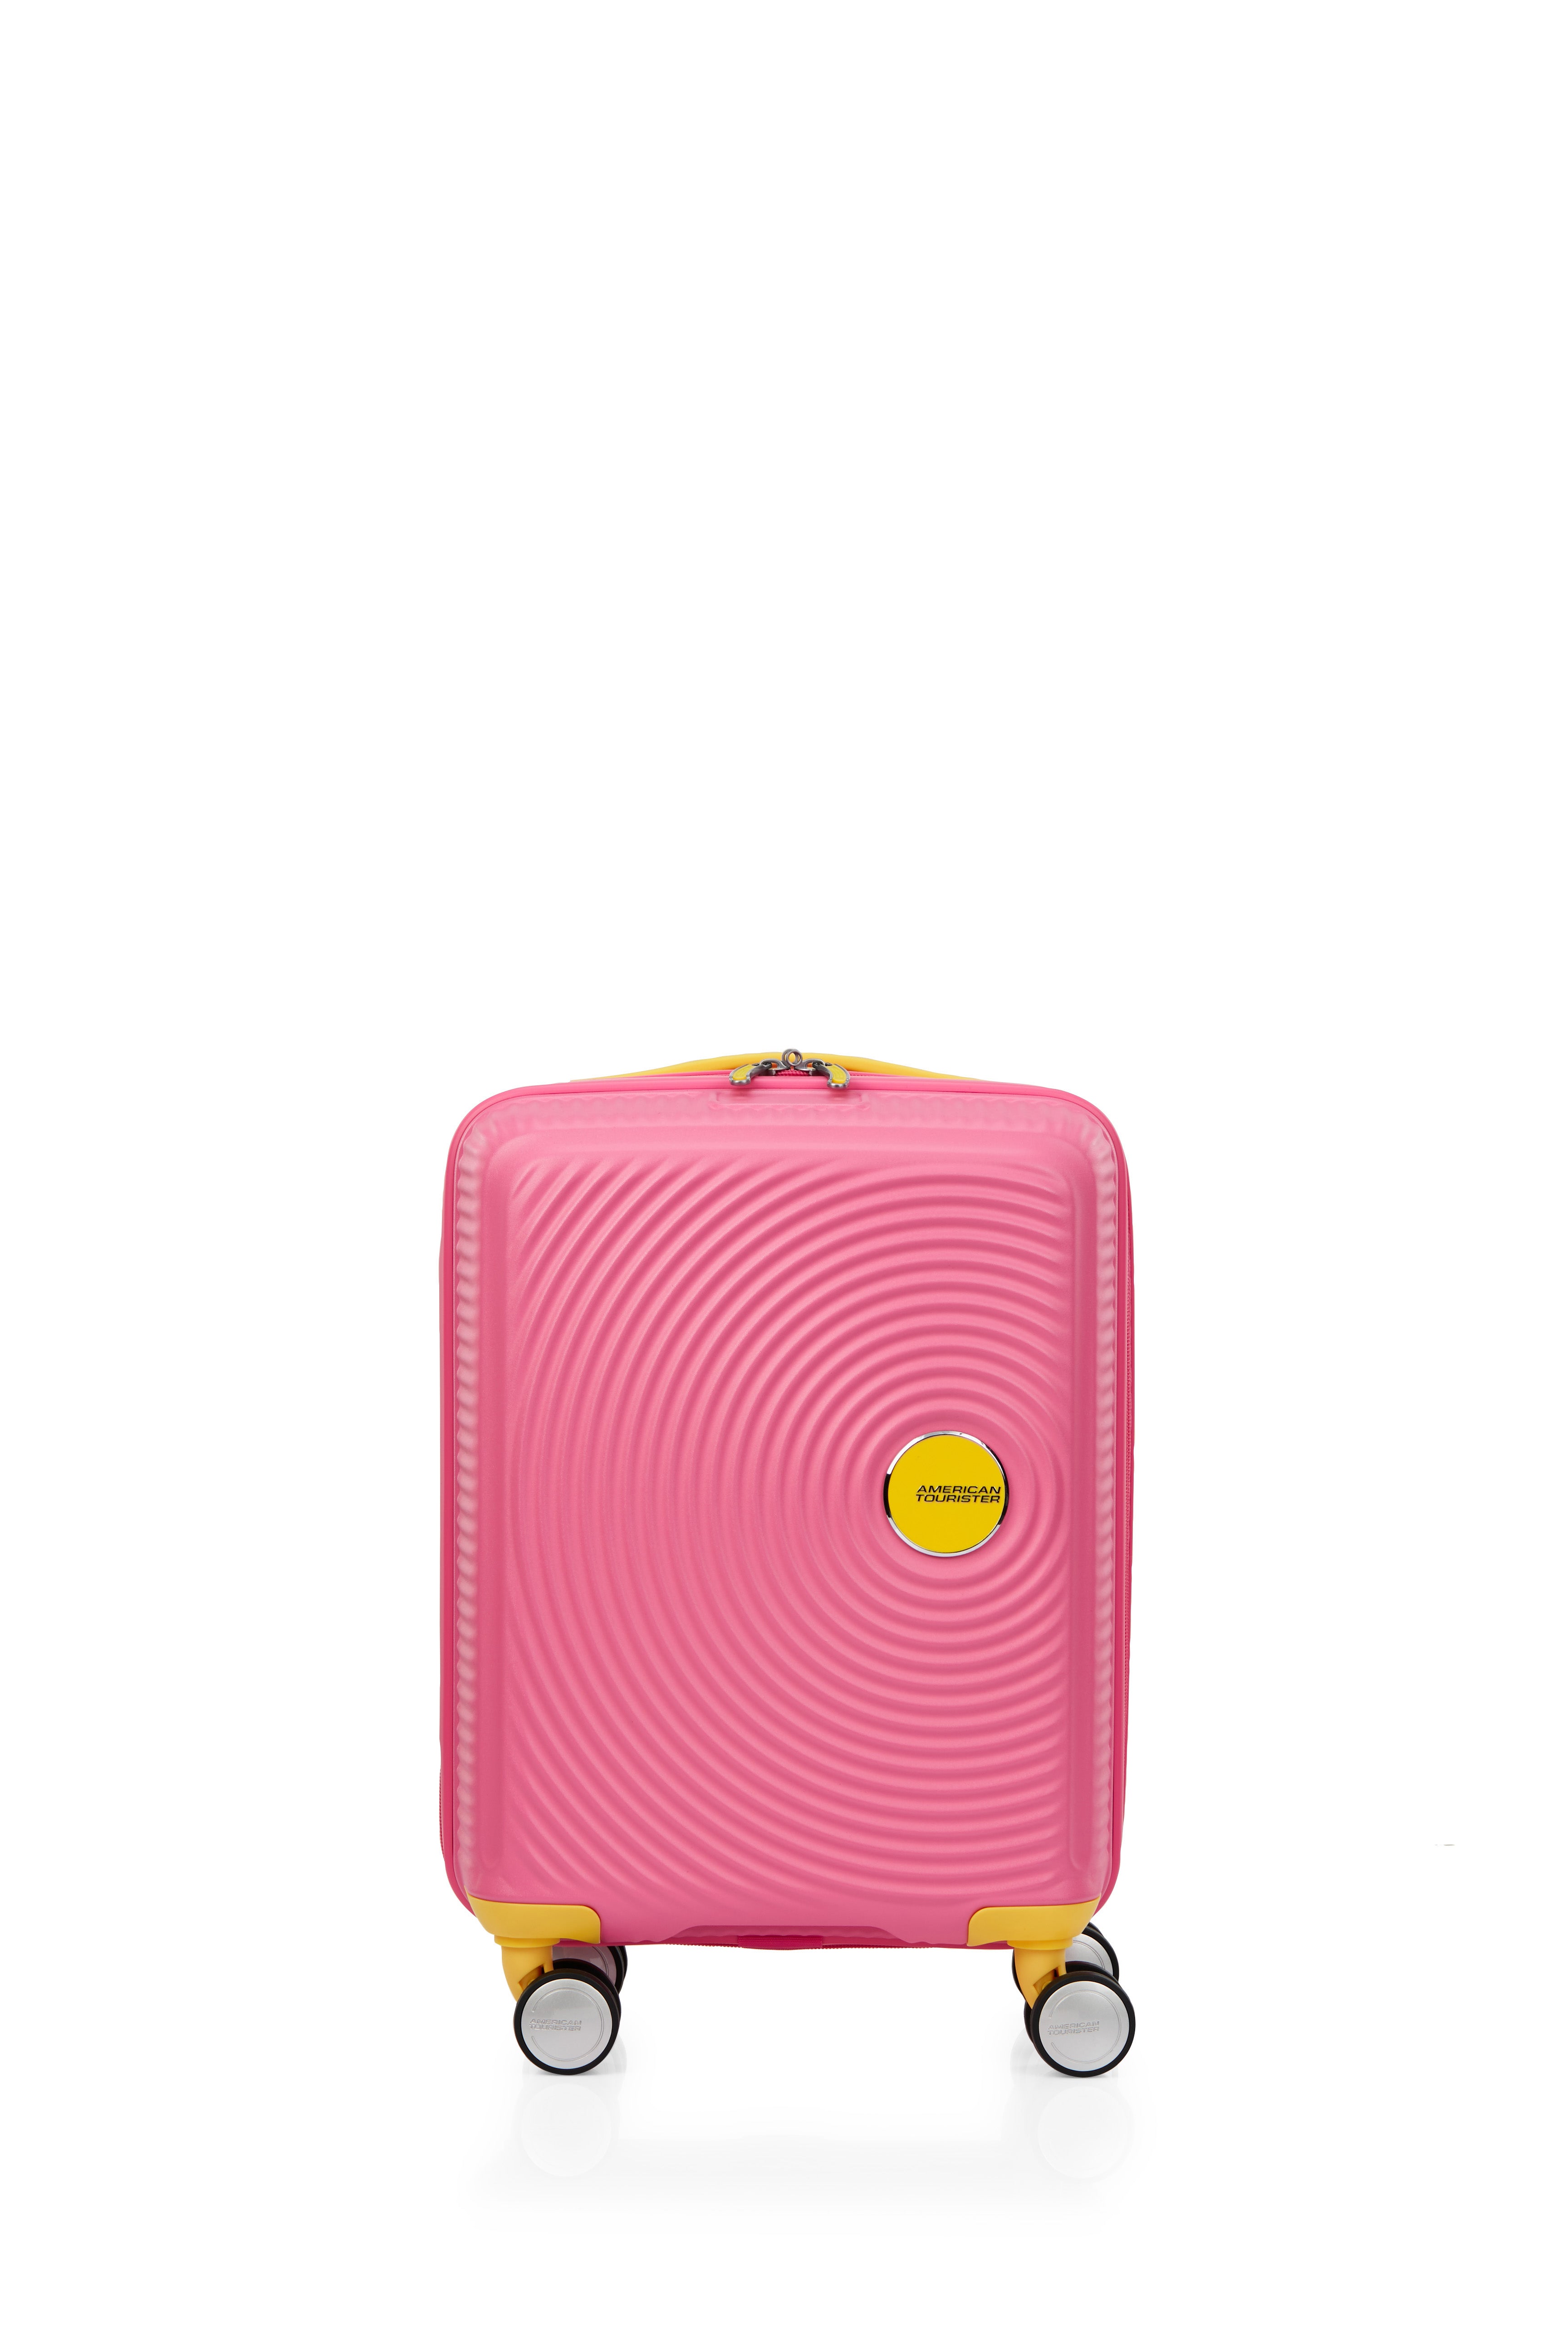 American Tourister - Little Curio 47cm Spinner - Pink/Yellow-1